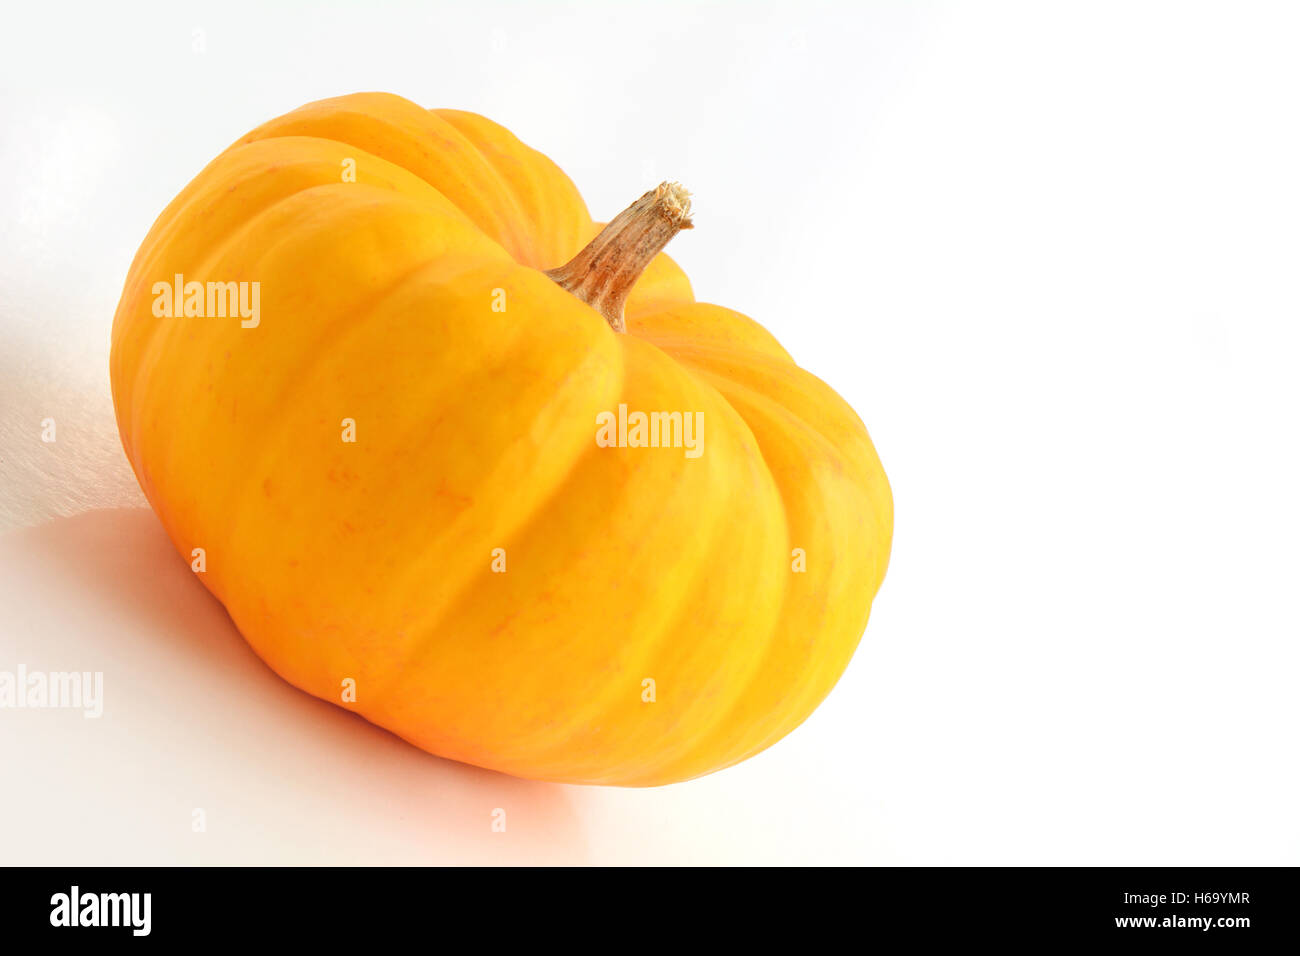 Golden miniature pumpkin on white background shot in natural light.  Horizontal format with room for your text. Stock Photo